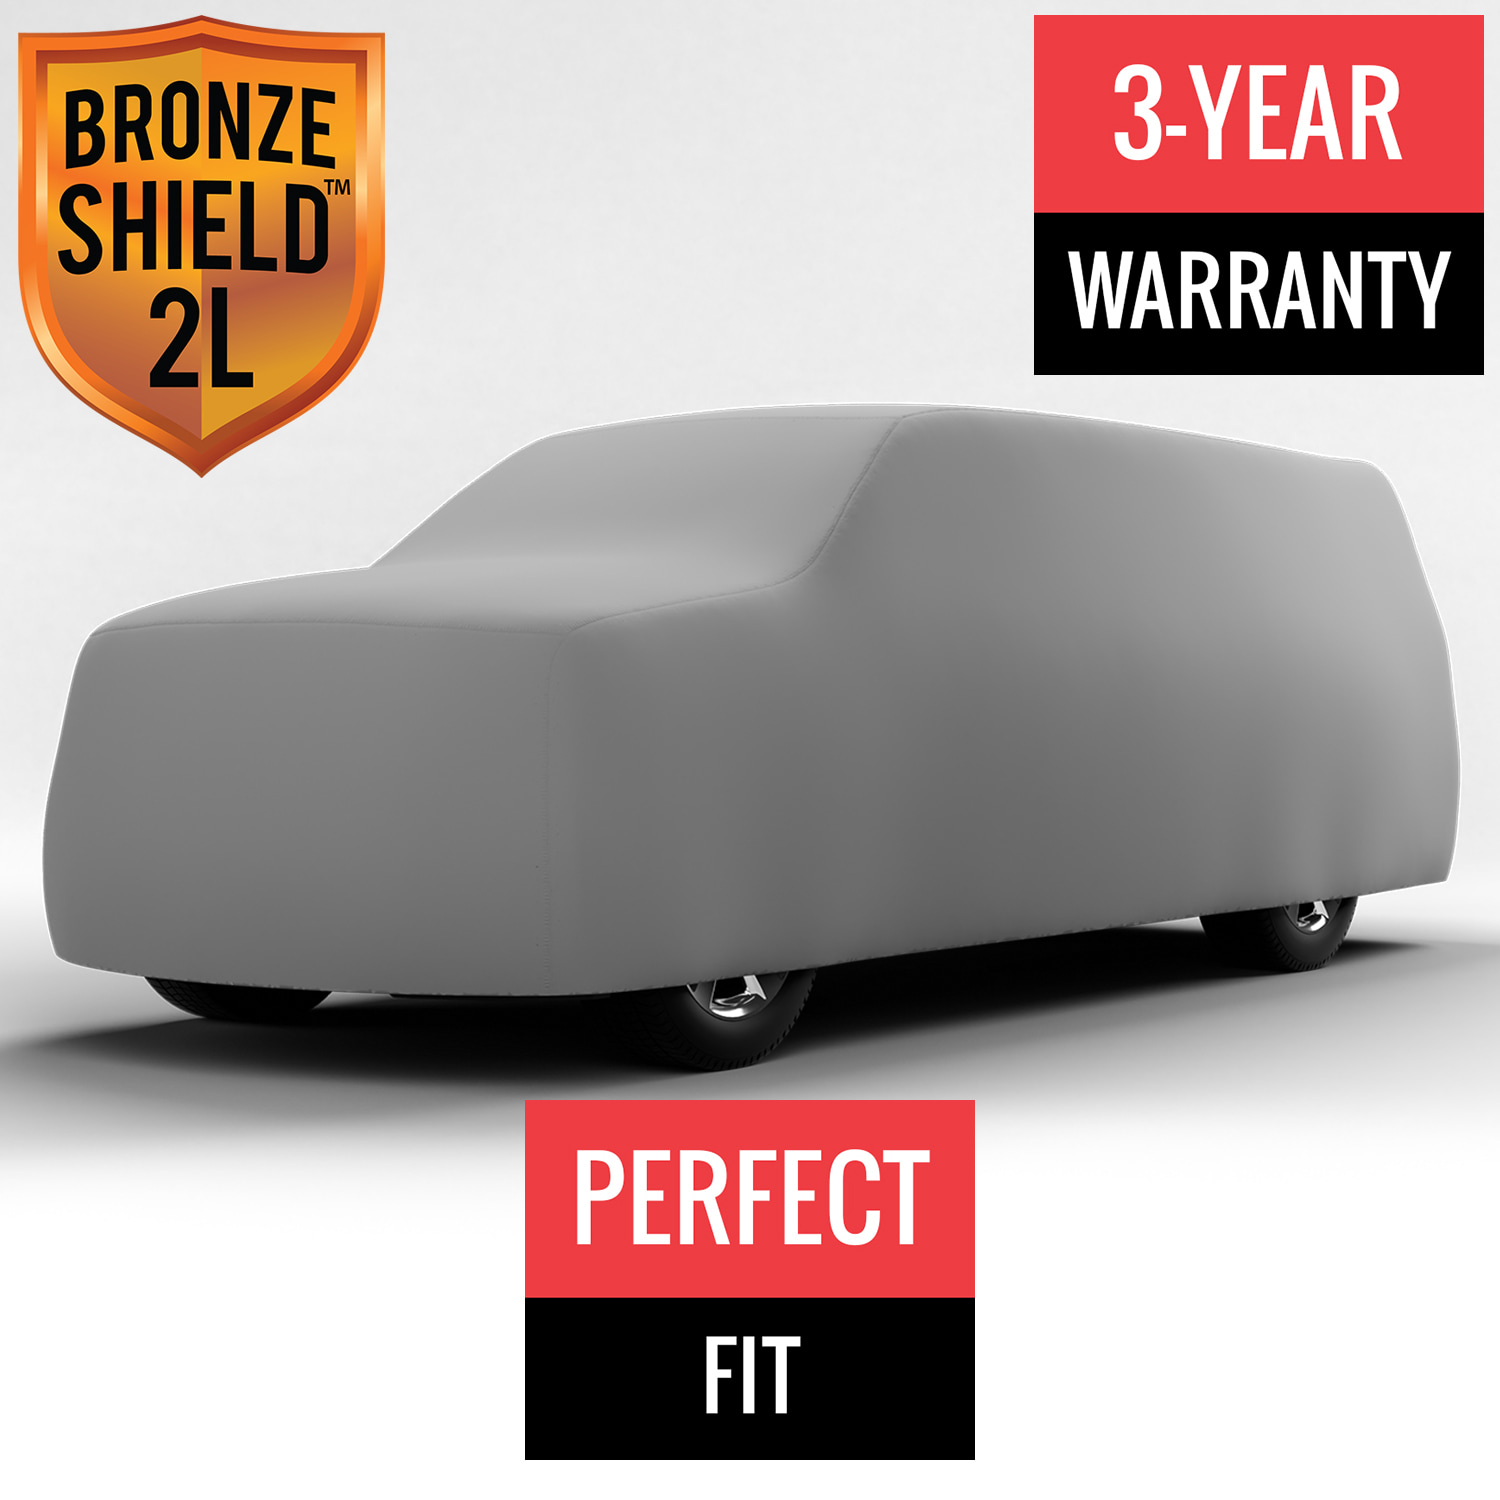 Bronze Shield 2L - Car Cover for GMC C1500 1997 Regular Cab Pickup 8.0 Feet Bed with Camper Shell